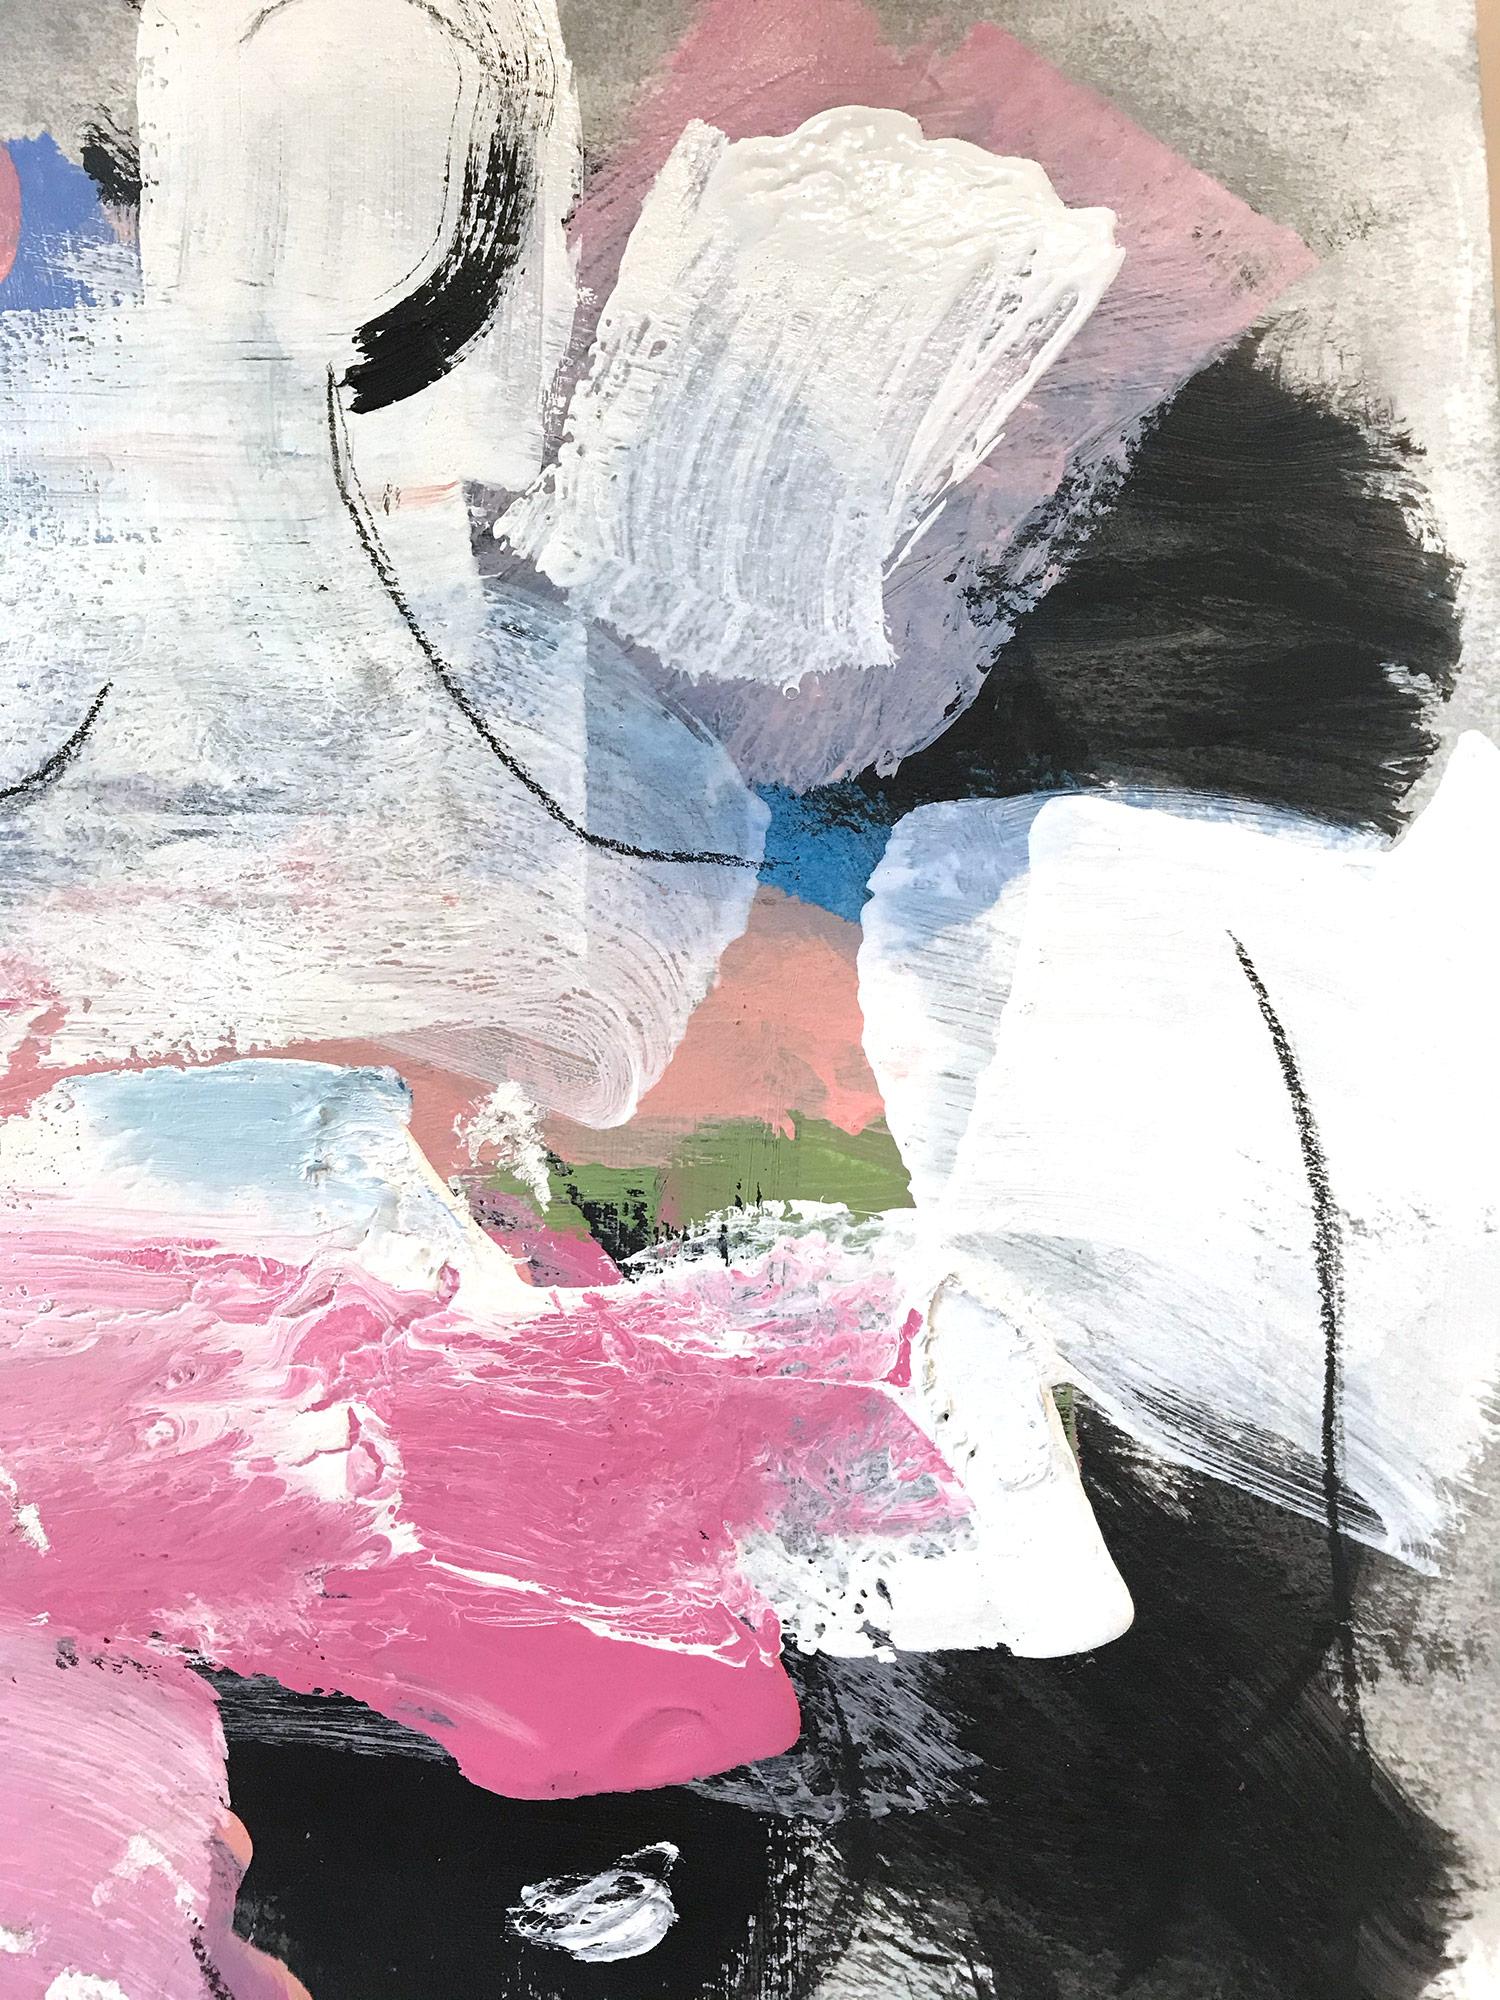 A beautiful minimal contemporary piece on Heavy Weight paper done with mixed media and a lot of texture. This piece is filled with movement and beautiful brushwork. The artist evokes a wonderful sense of lust and beauty in her sense of style and